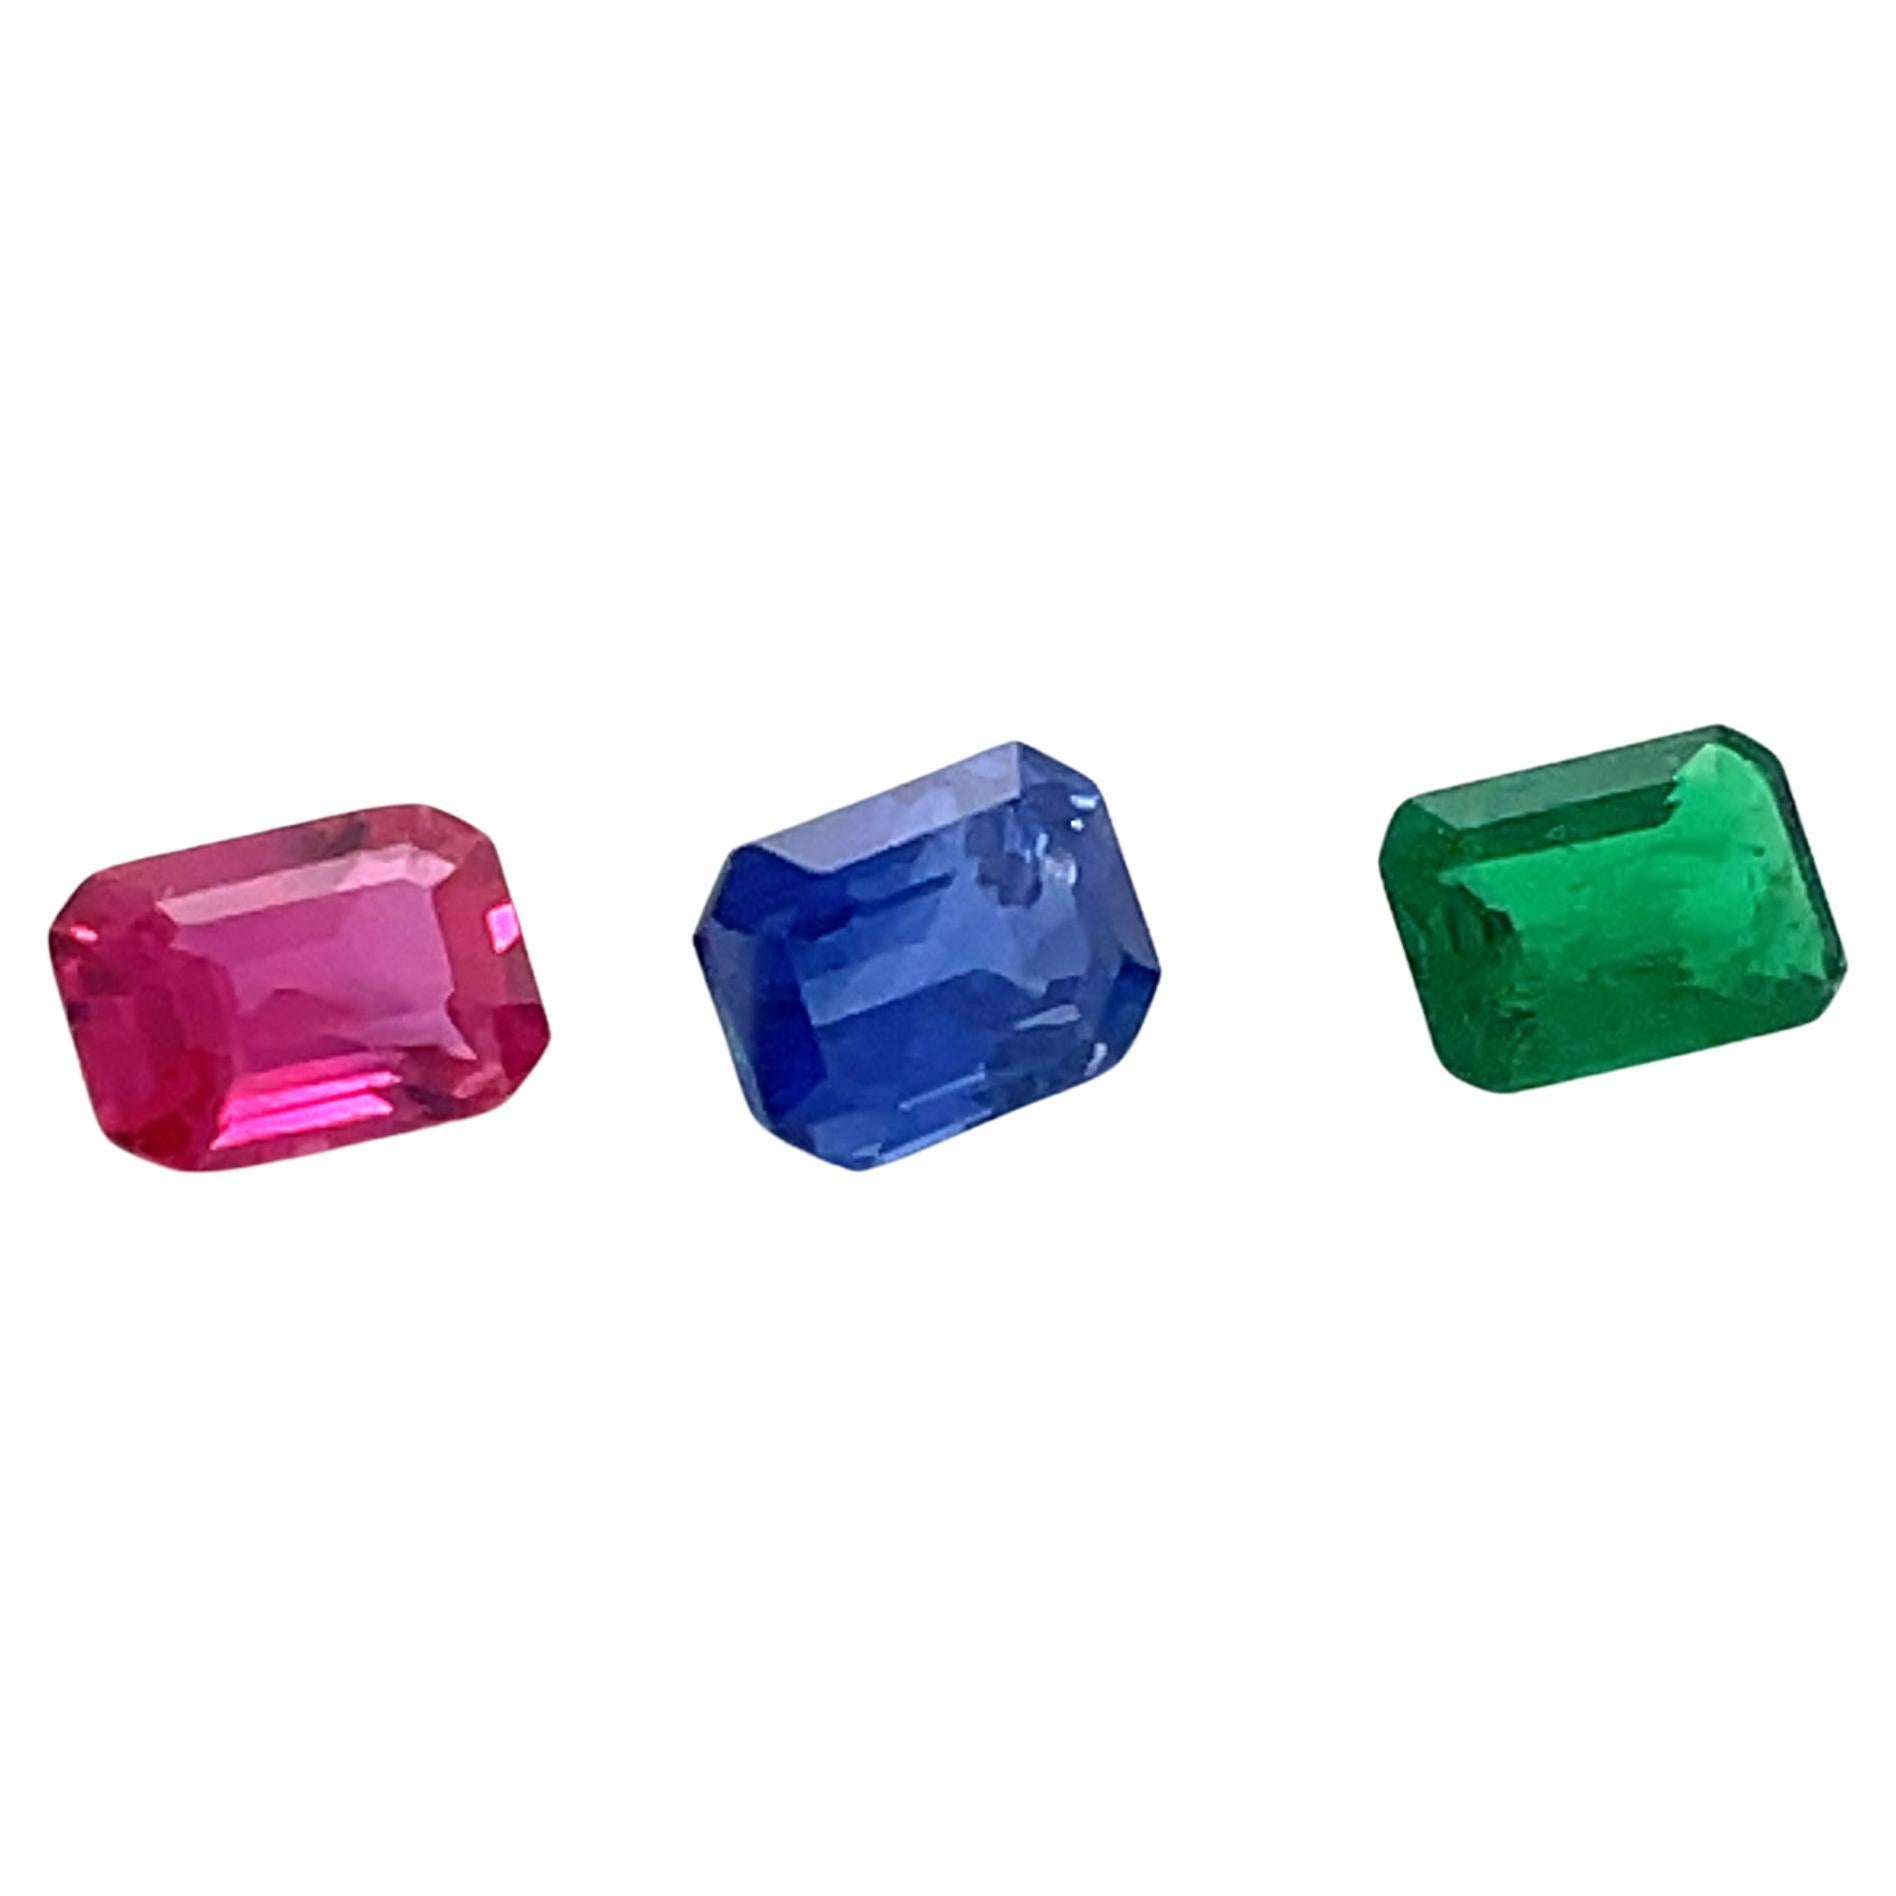 Emerald-Cut Ruby Cts 1.31 and Blue Sapphire Cts 2.16 and Emerald Cts 0.92 Loose  For Sale